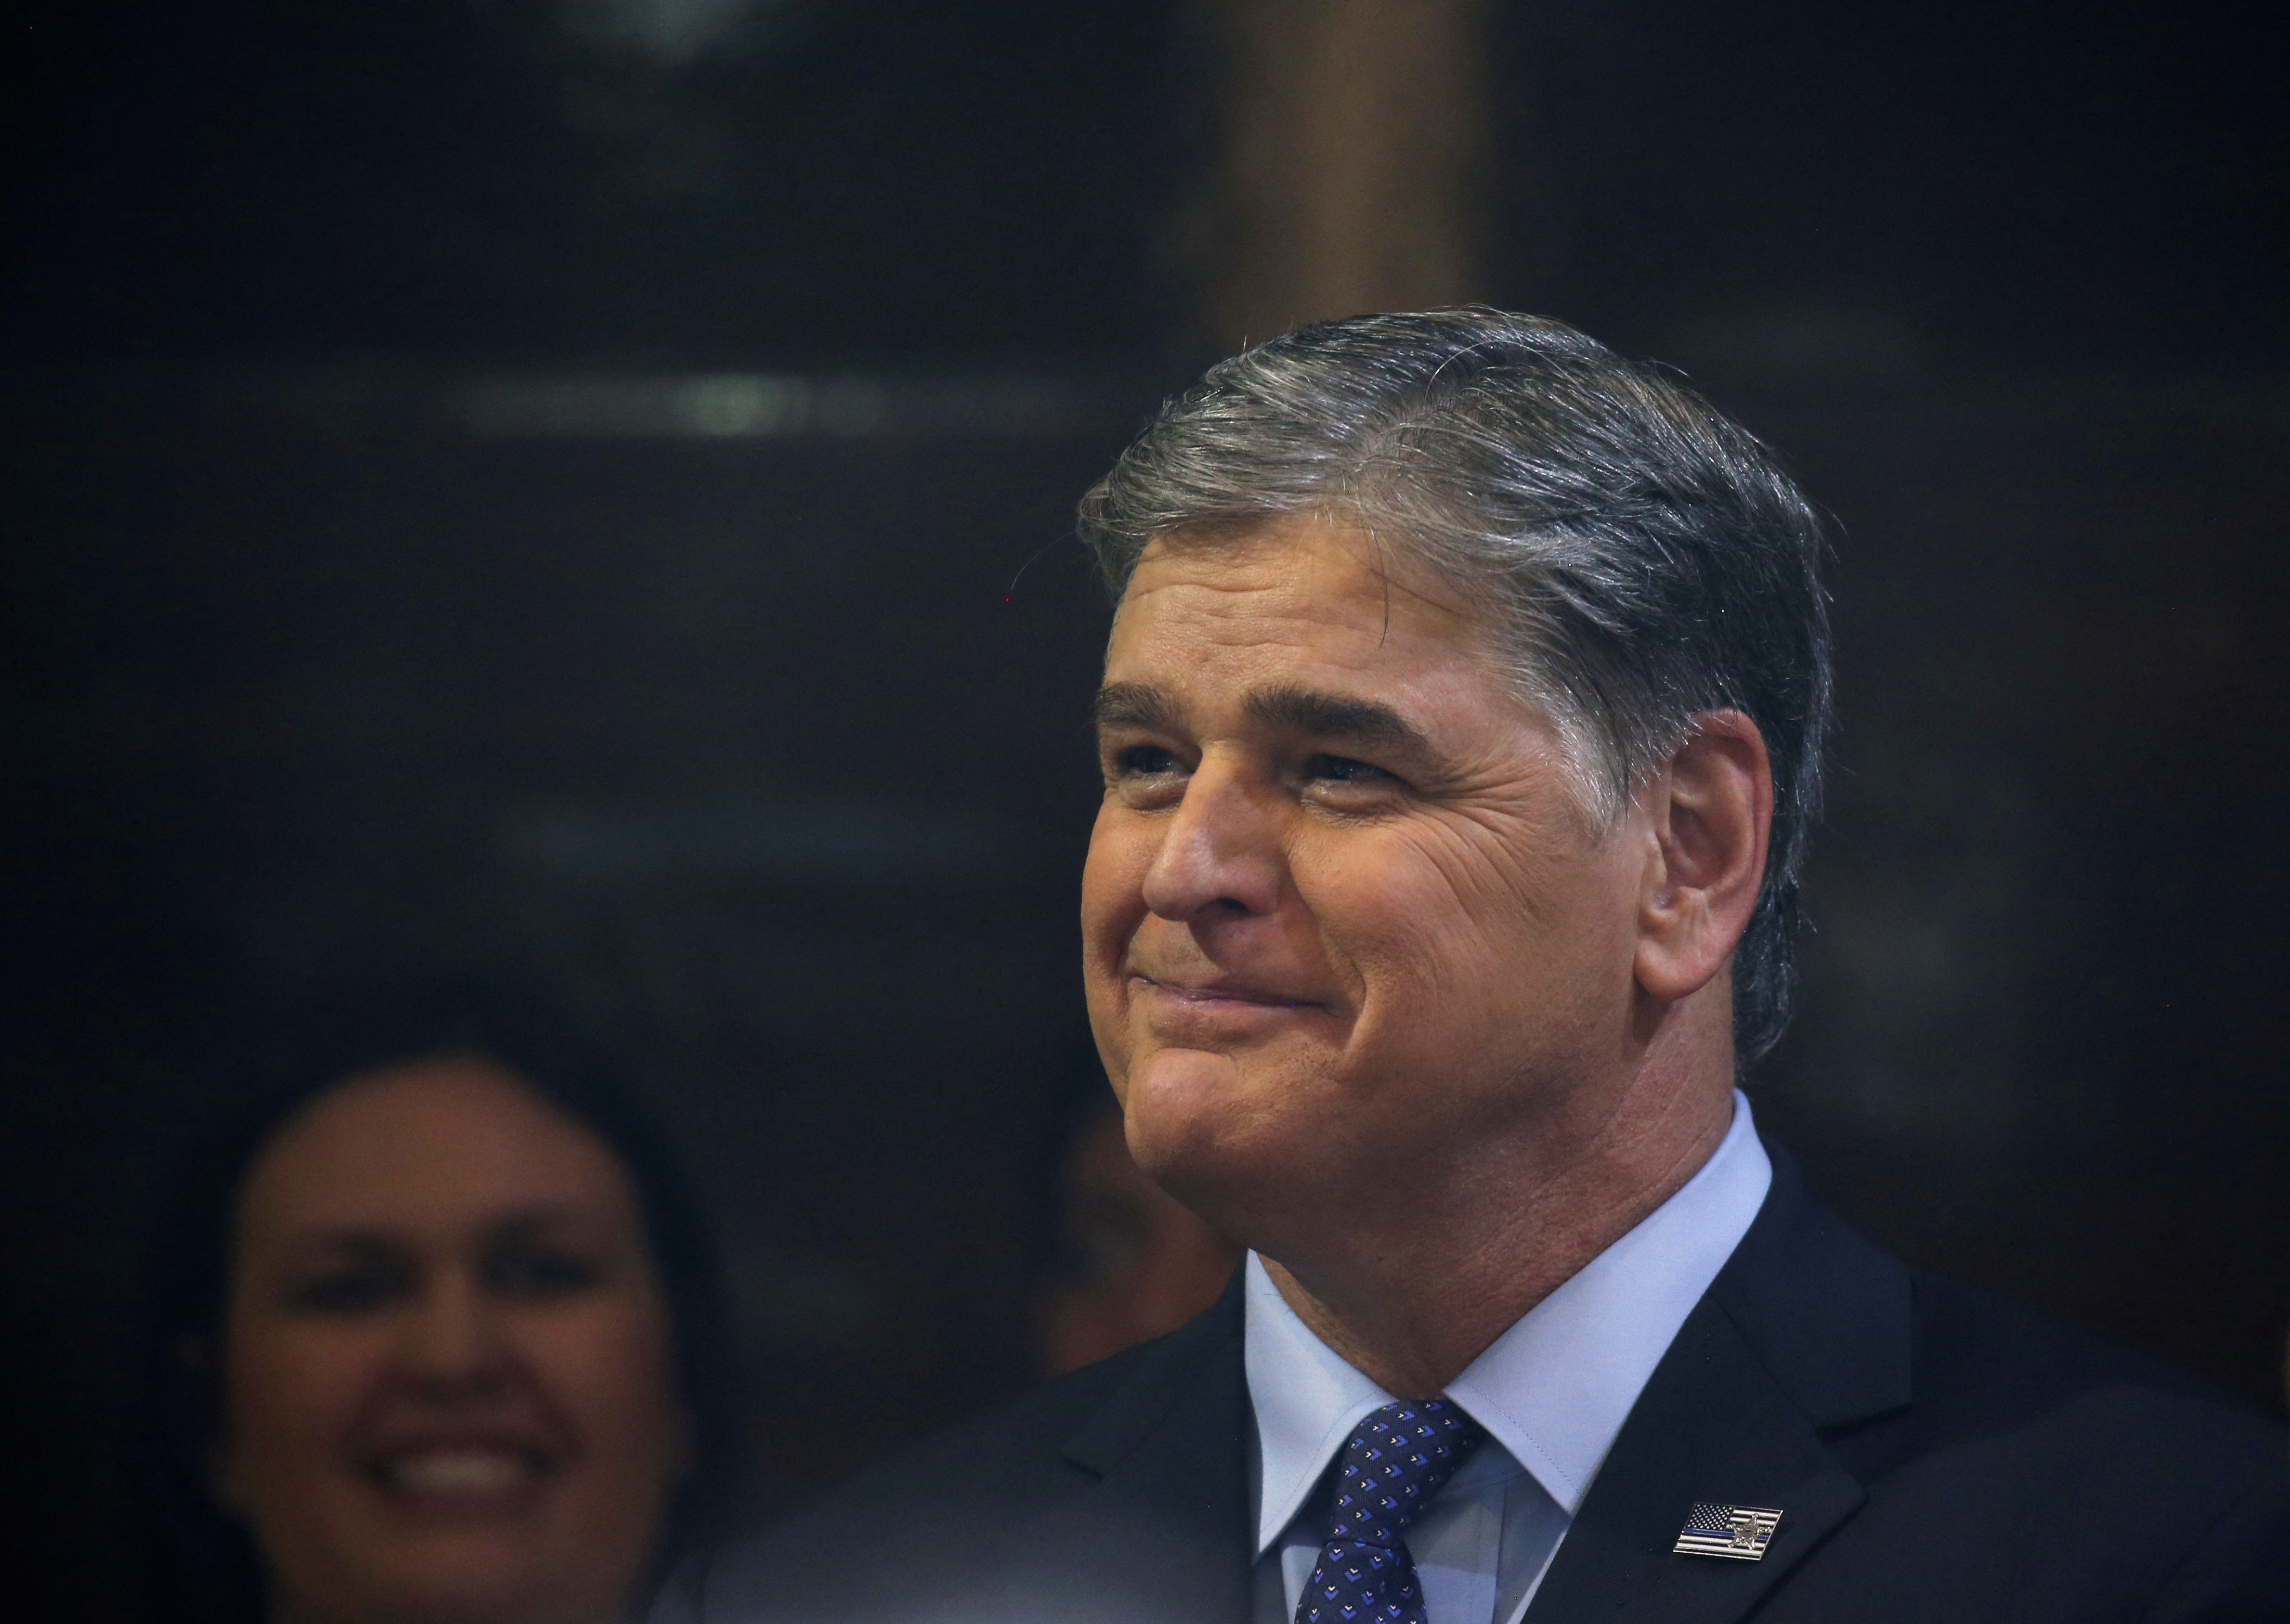 Sean Hannity from Fox News looks on as U.S. President Donald Trump holds a news conference after his summit with North Korean leader Kim Jong Un at the JW Marriott hotel in Hanoi